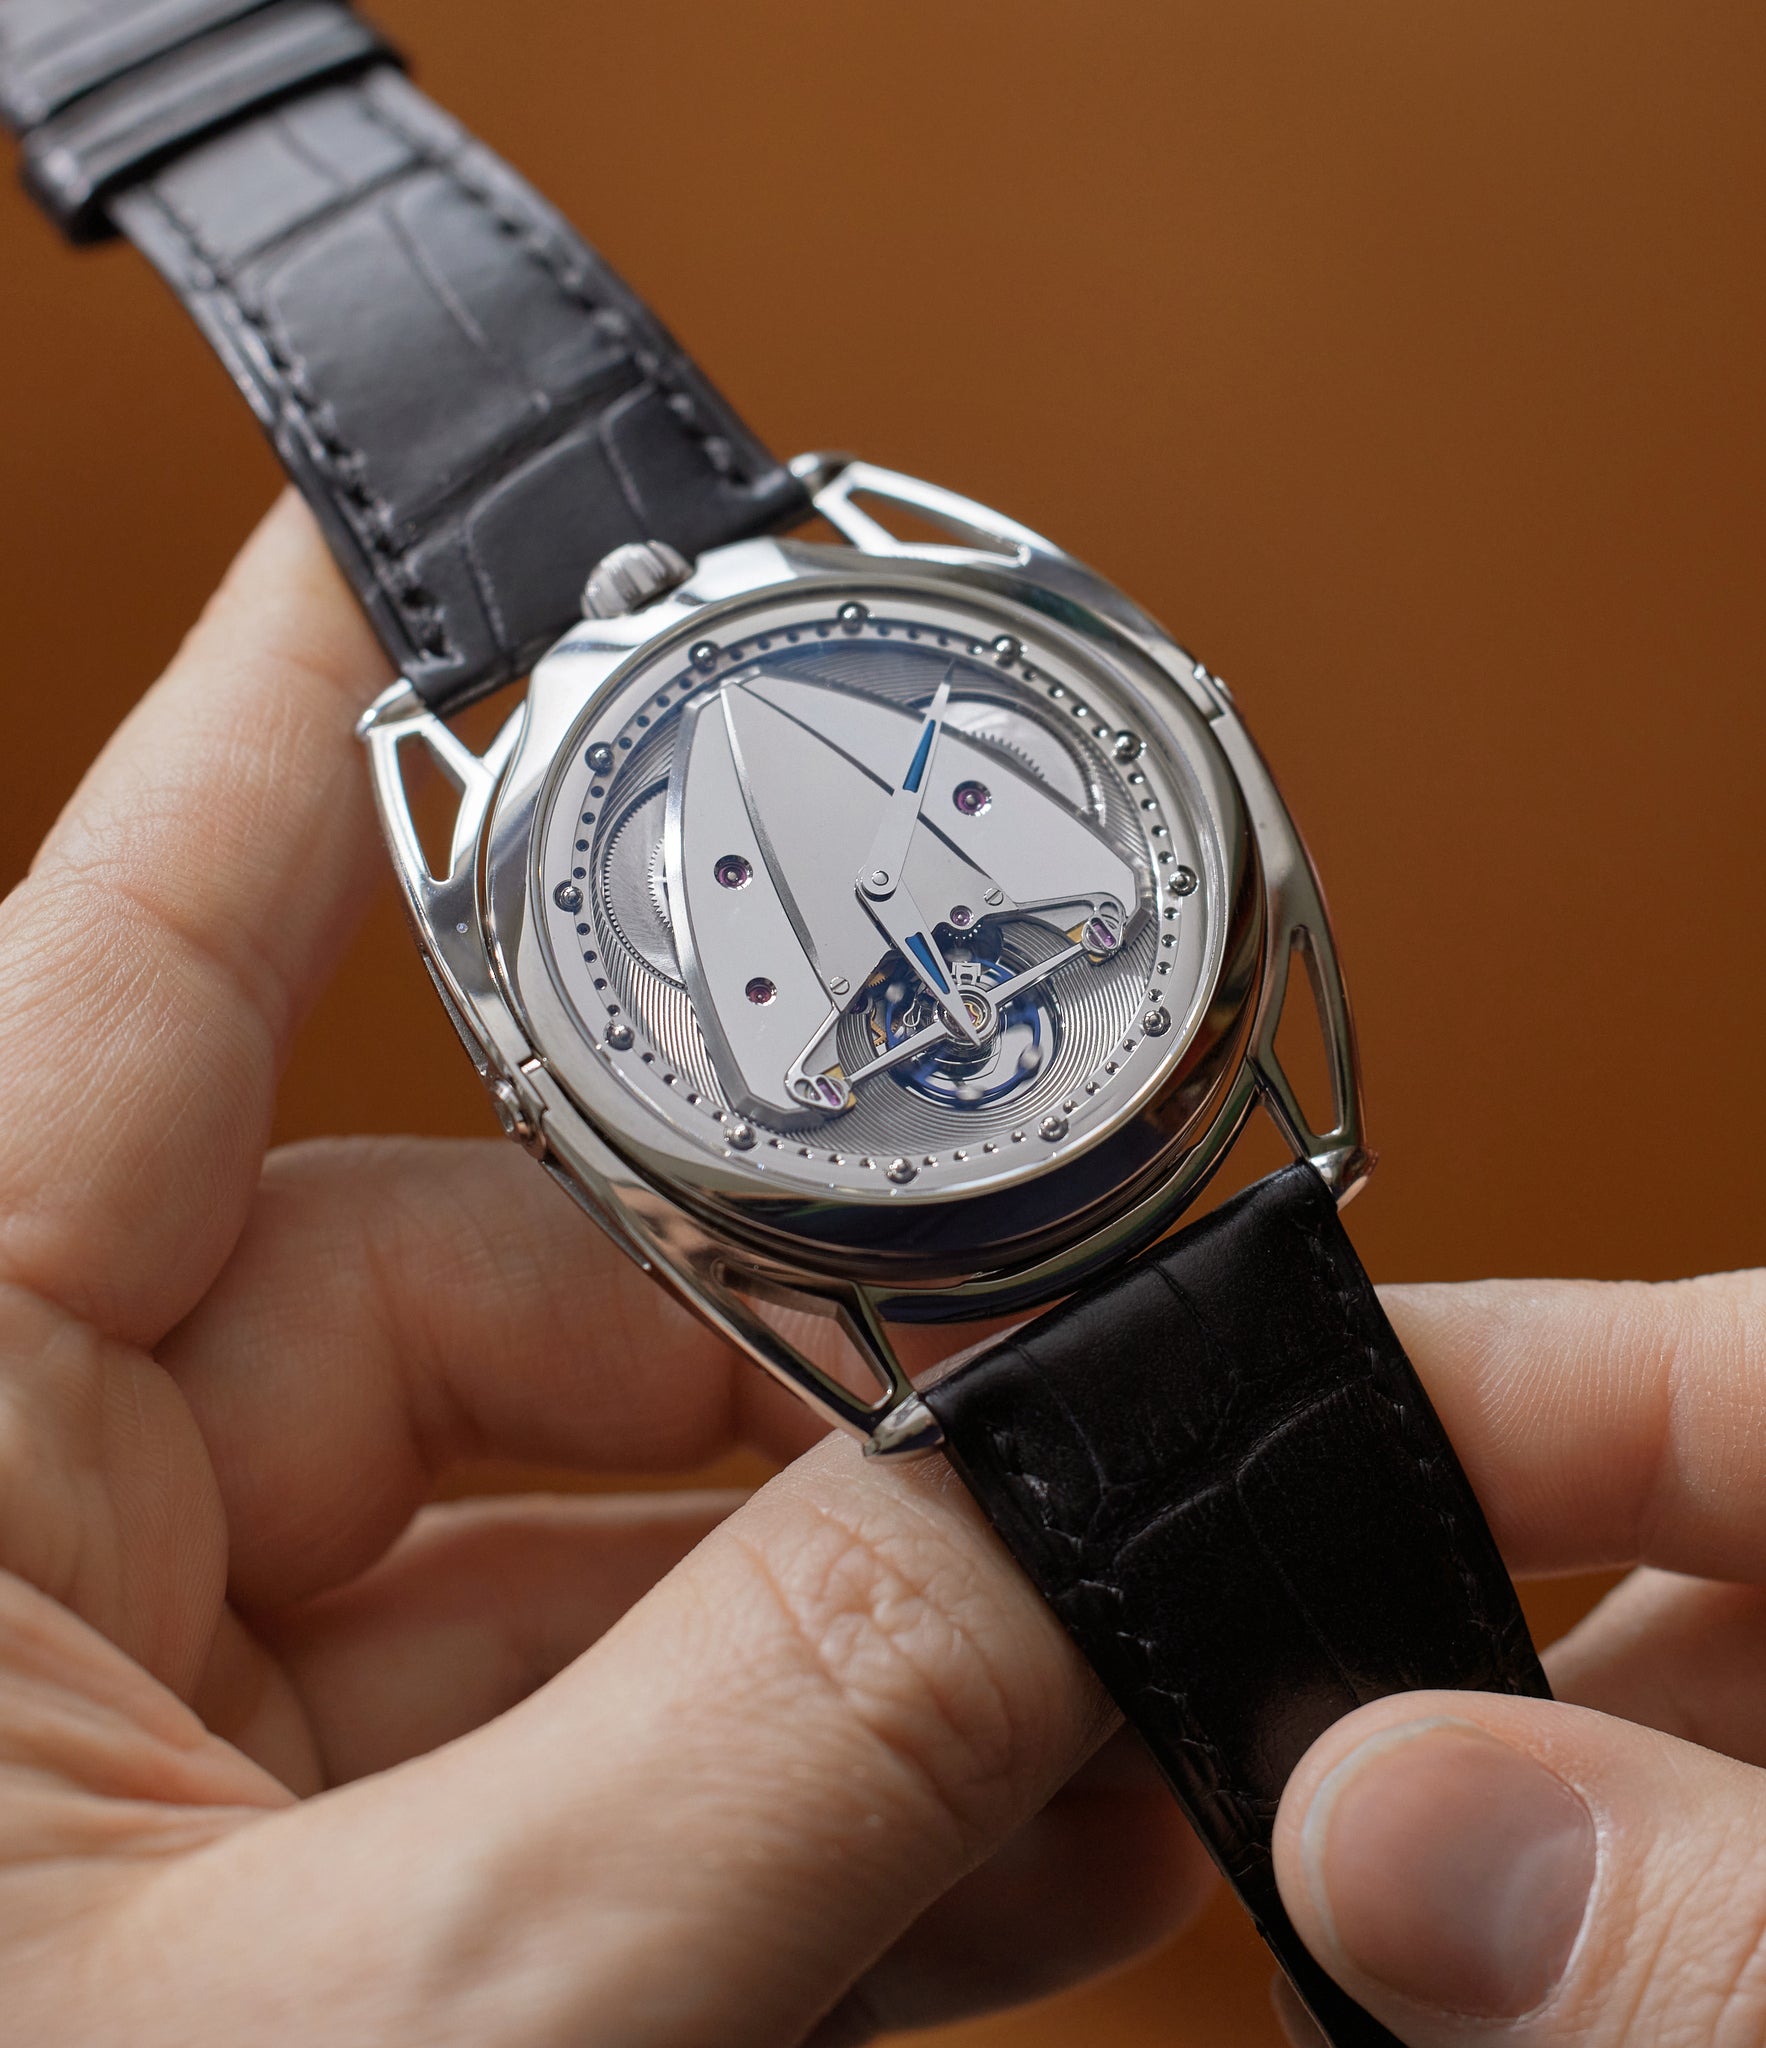 A Brief History of De Bethune – A COLLECTED MAN